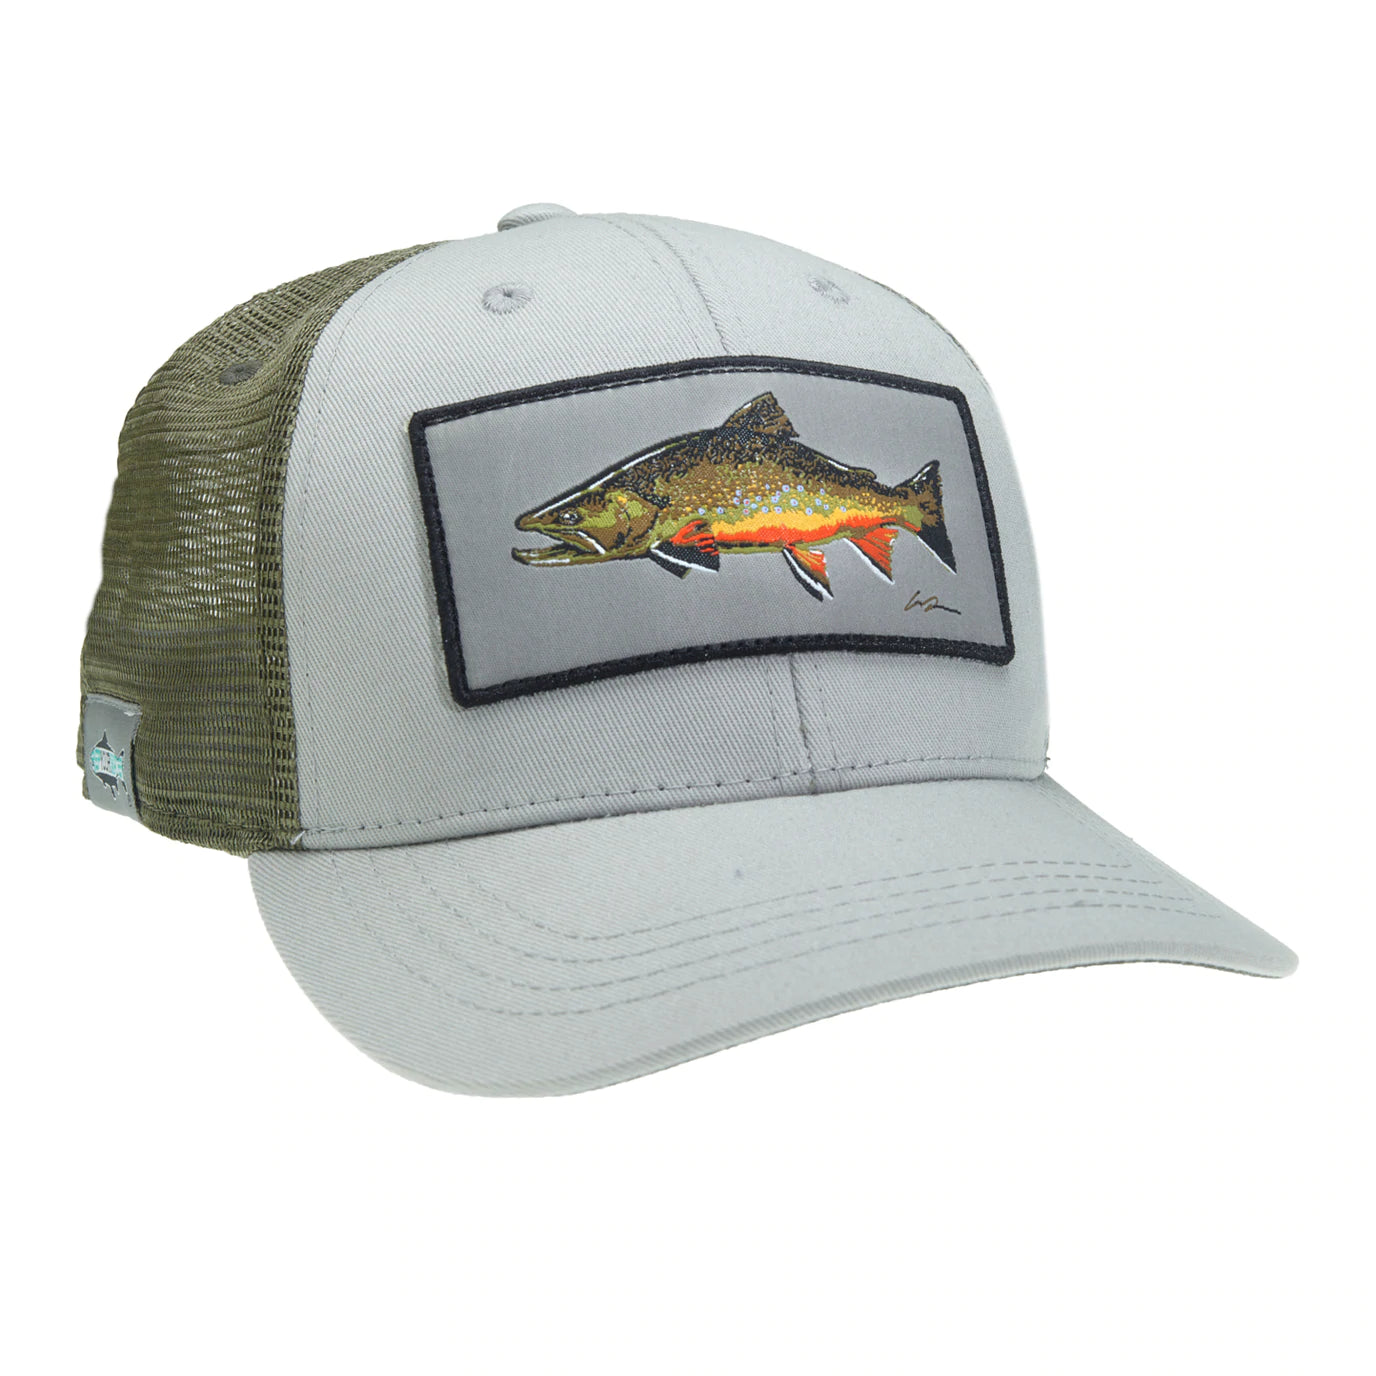 Rep Your Water Big Brookie Hat - Standard fit